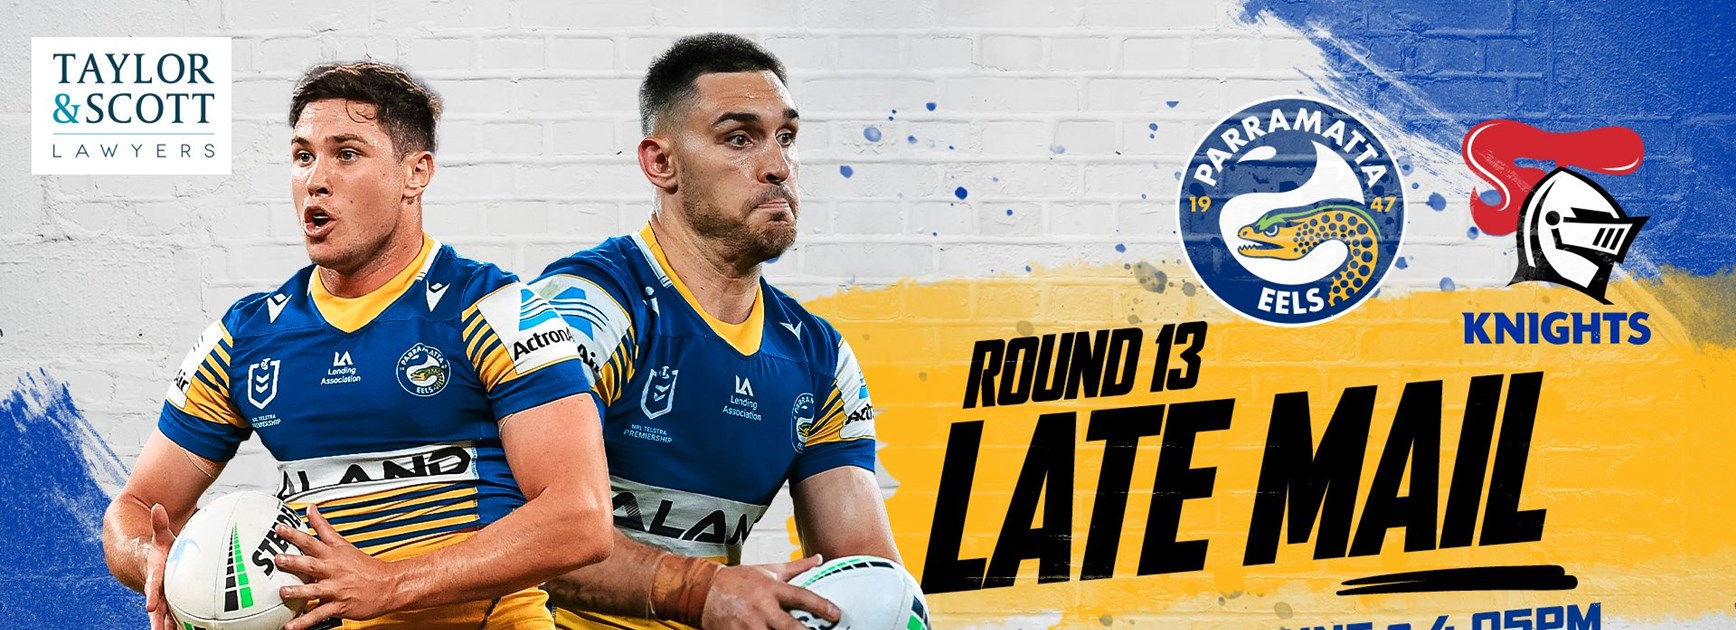 Late Mail - Knights v Eels, Round 13